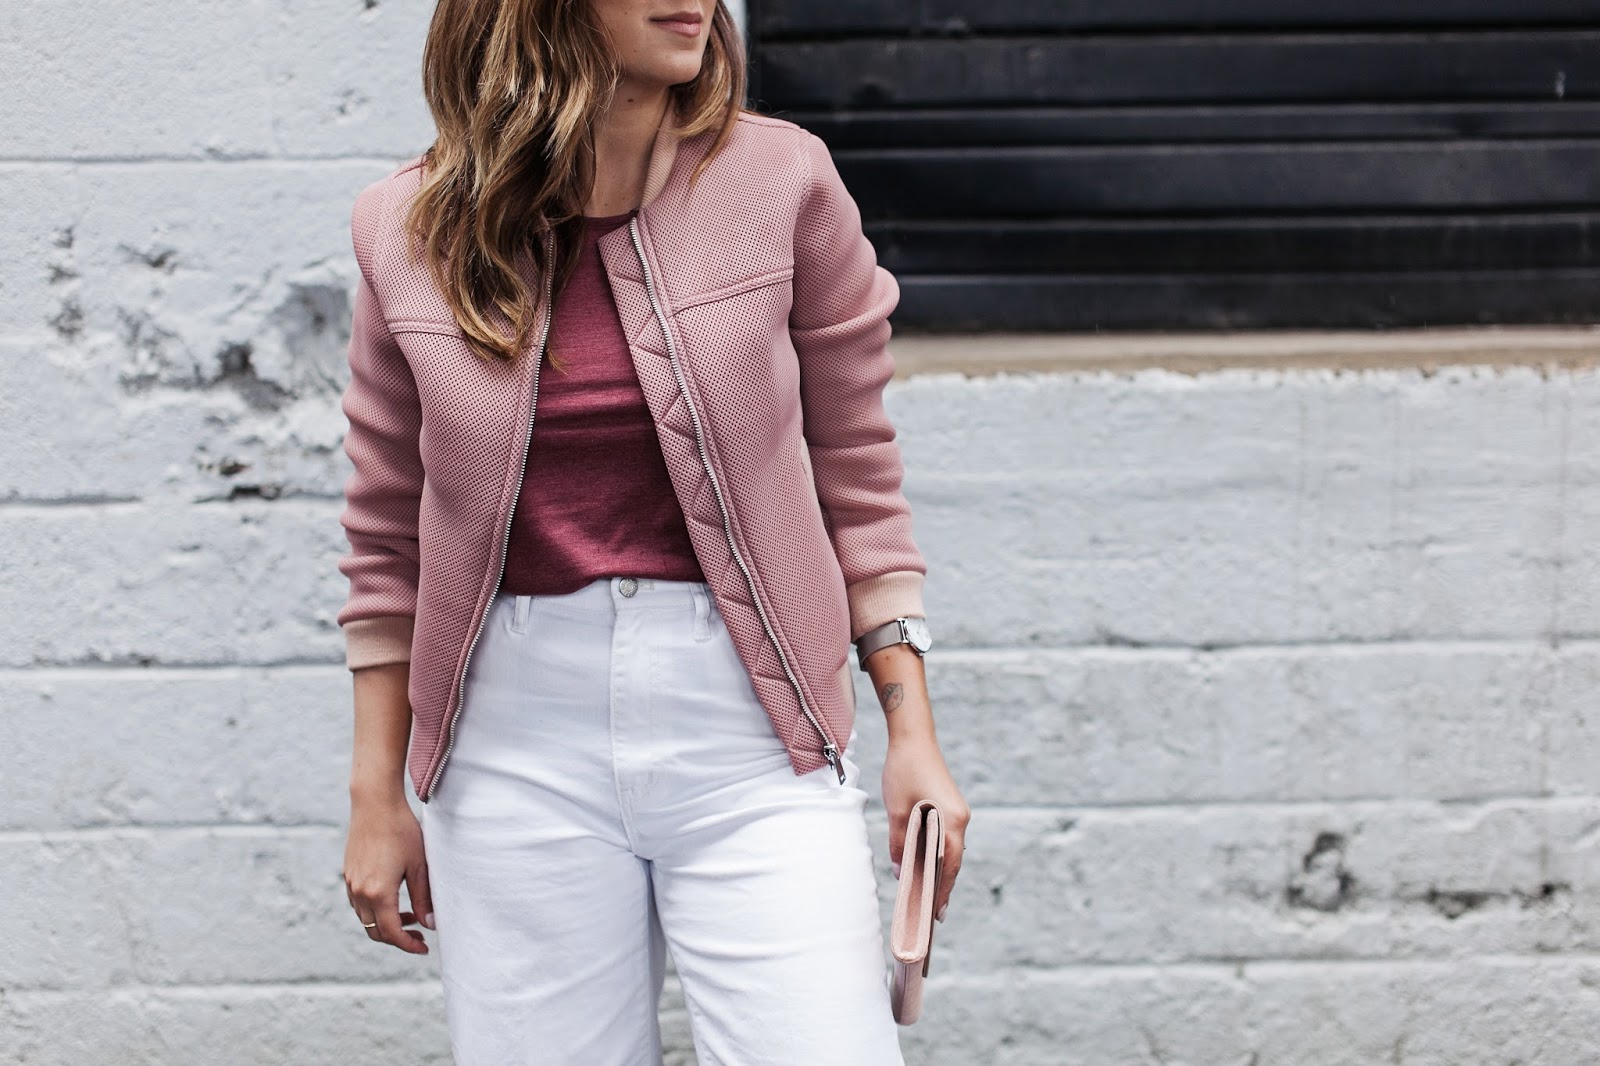 pink, style, how to style pink, blush tones, topshop, nordstrom, madewell, denim, white jeans, flatforms, platform, espadrilles, sole society, bomber jacket, outfit, fashion, blogger, blog, dc, dc blogger, influencer, inspiration